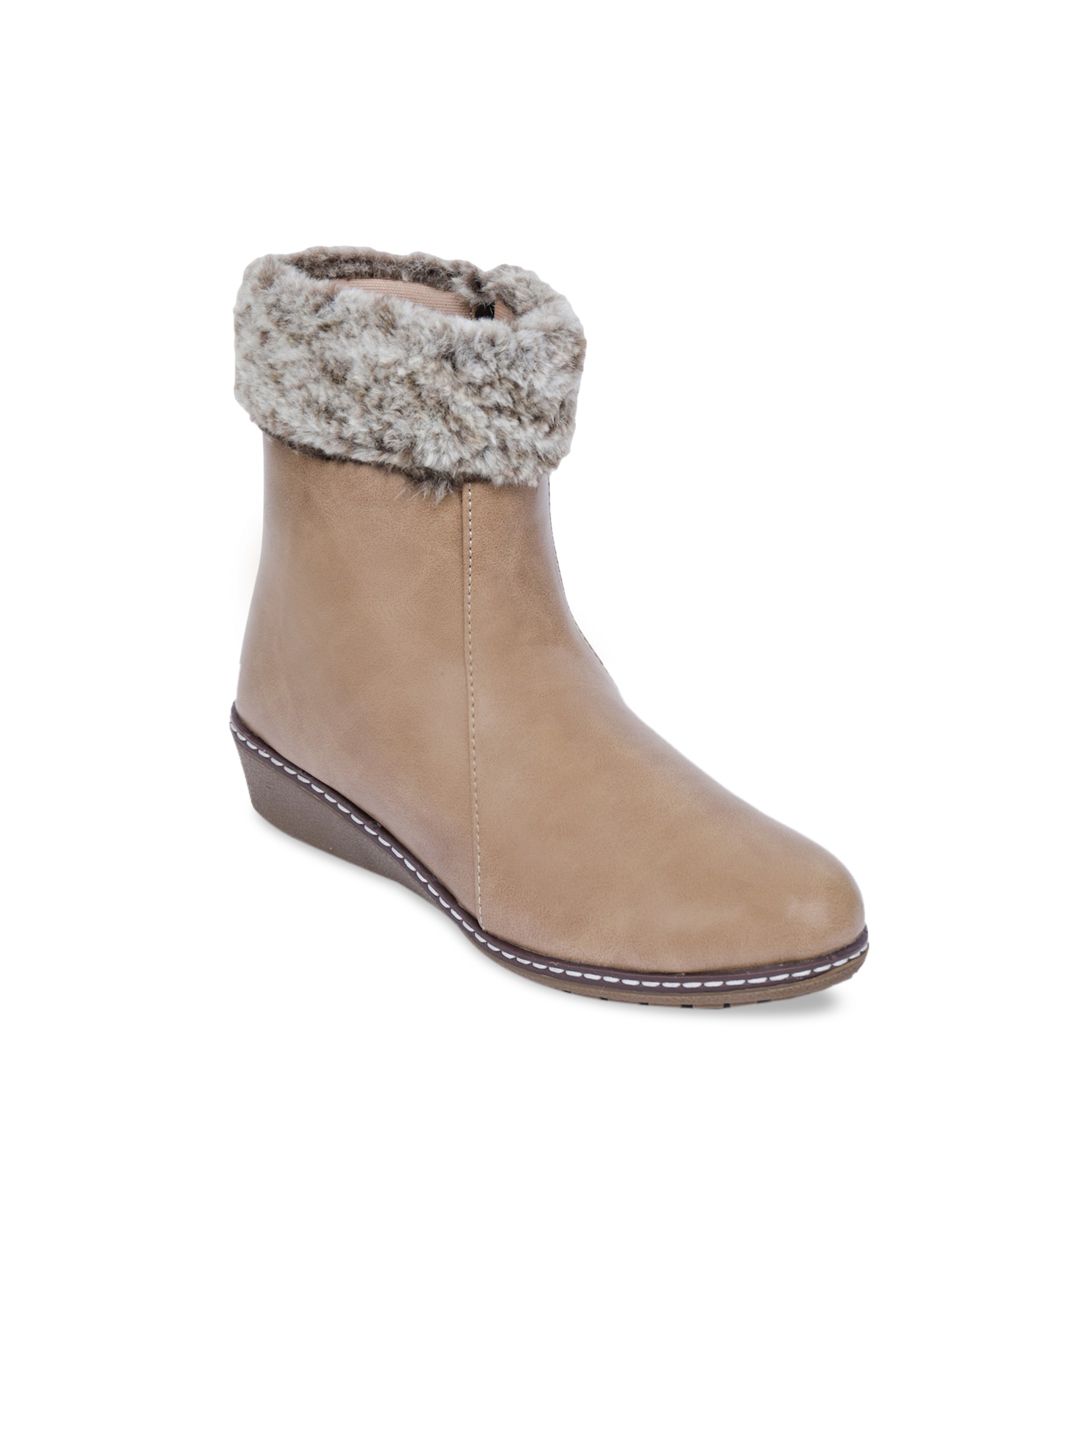 TRASE Women Beige Solid Heeled Boots Price in India